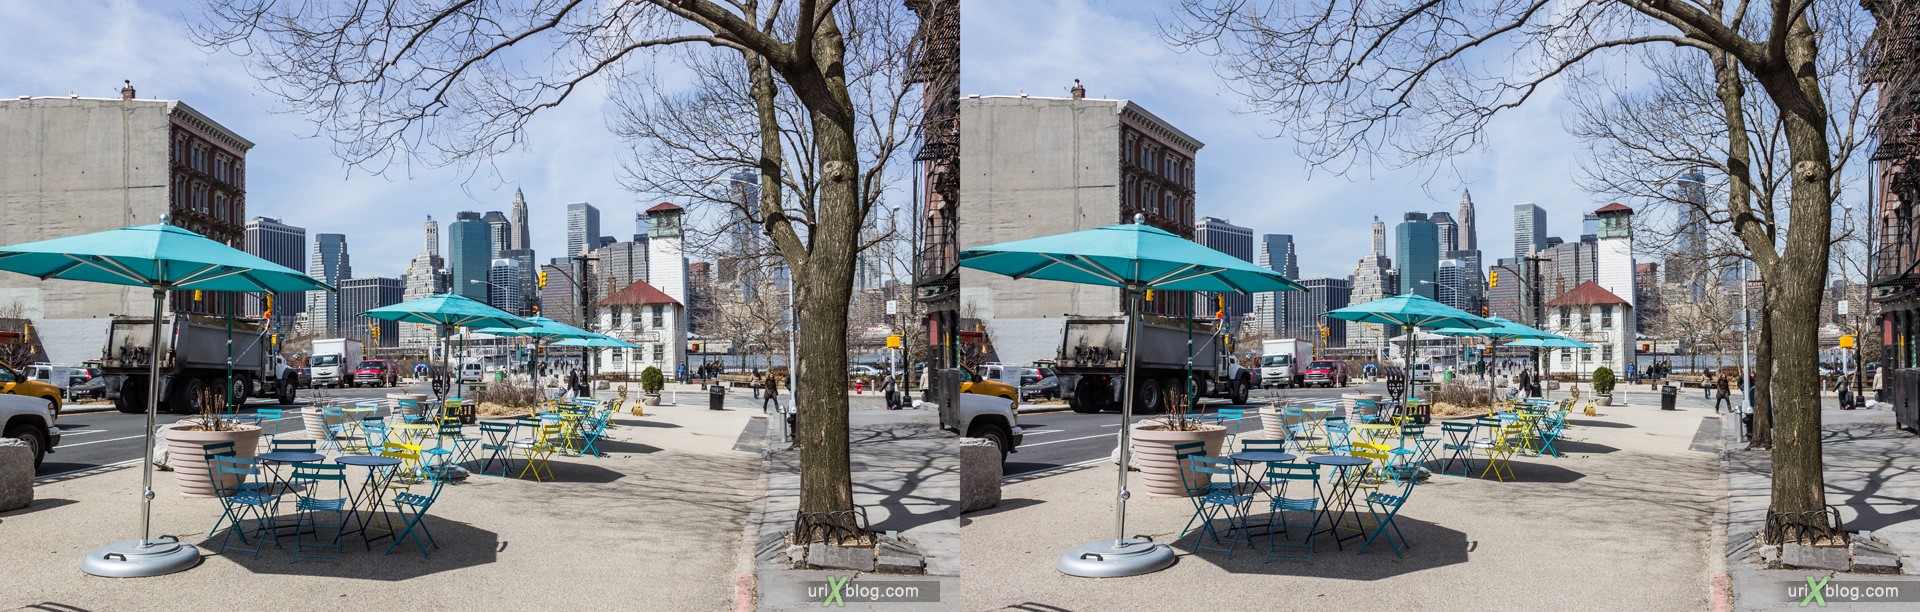 2013, Old Fulton street, Brooklyn, NYC, New York City, USA, 3D, stereo pair, cross-eyed, crossview, cross view stereo pair, stereoscopic